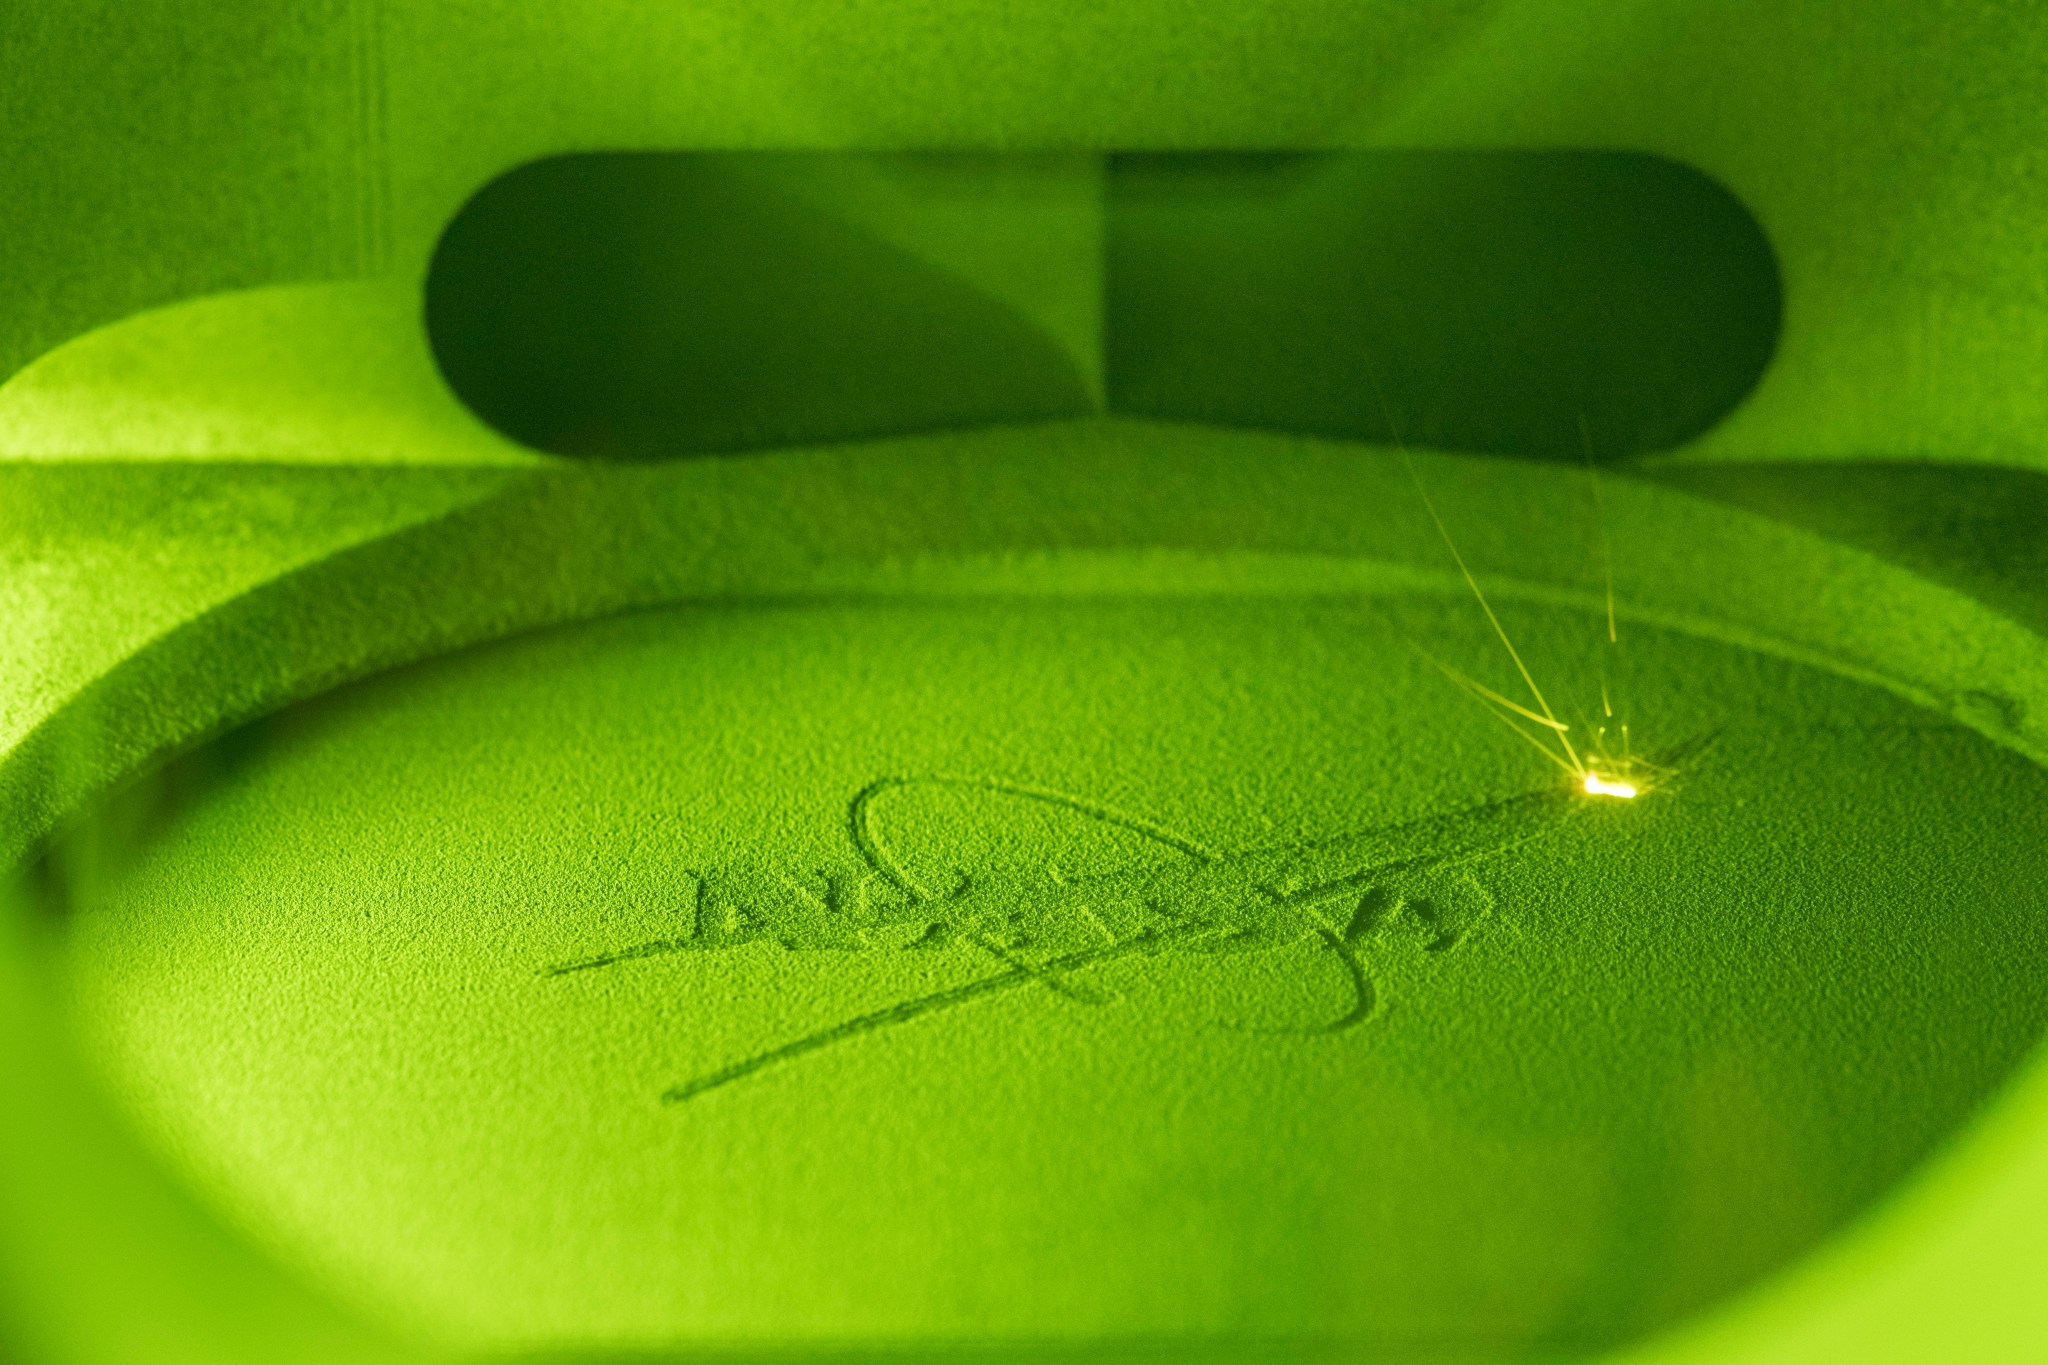 A NASA insignia, also known as the meatball, is being 3D printed and appears to be green in its printing chamber with a bright laser flash in the upper right-hand corner.